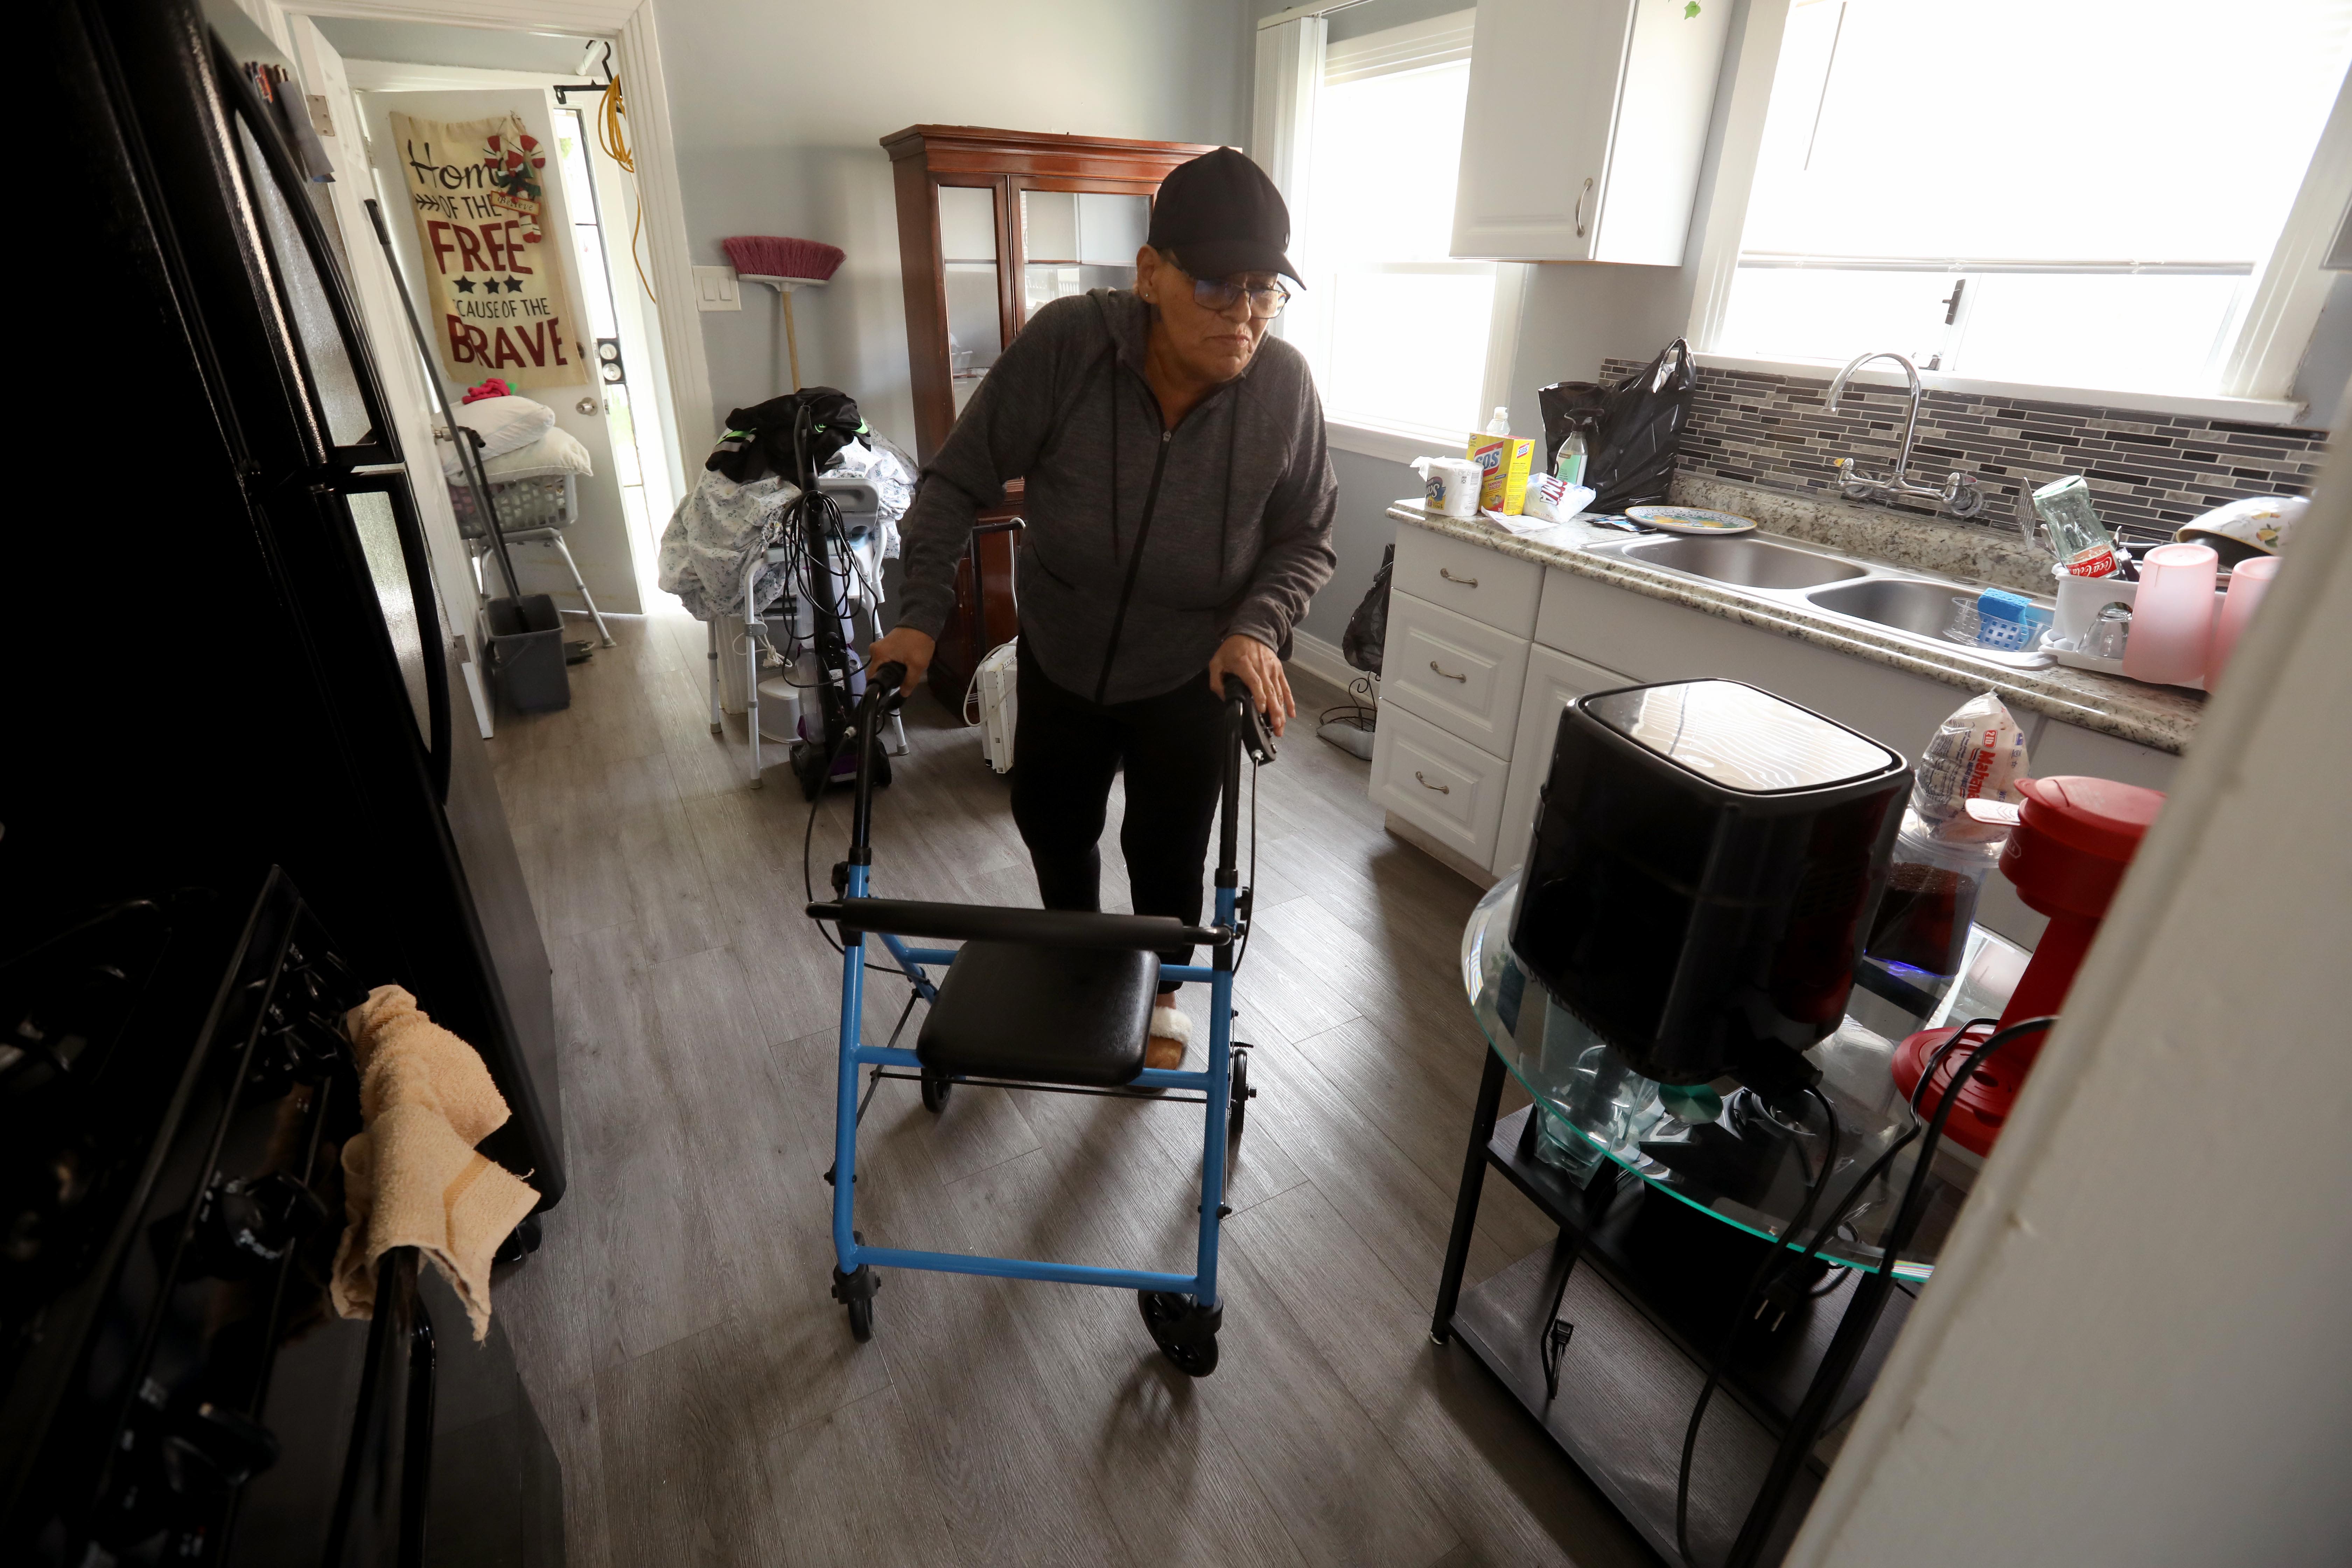 After 13 years, a homeless Angeleno broke into her old, vacant home and wants to stay forever